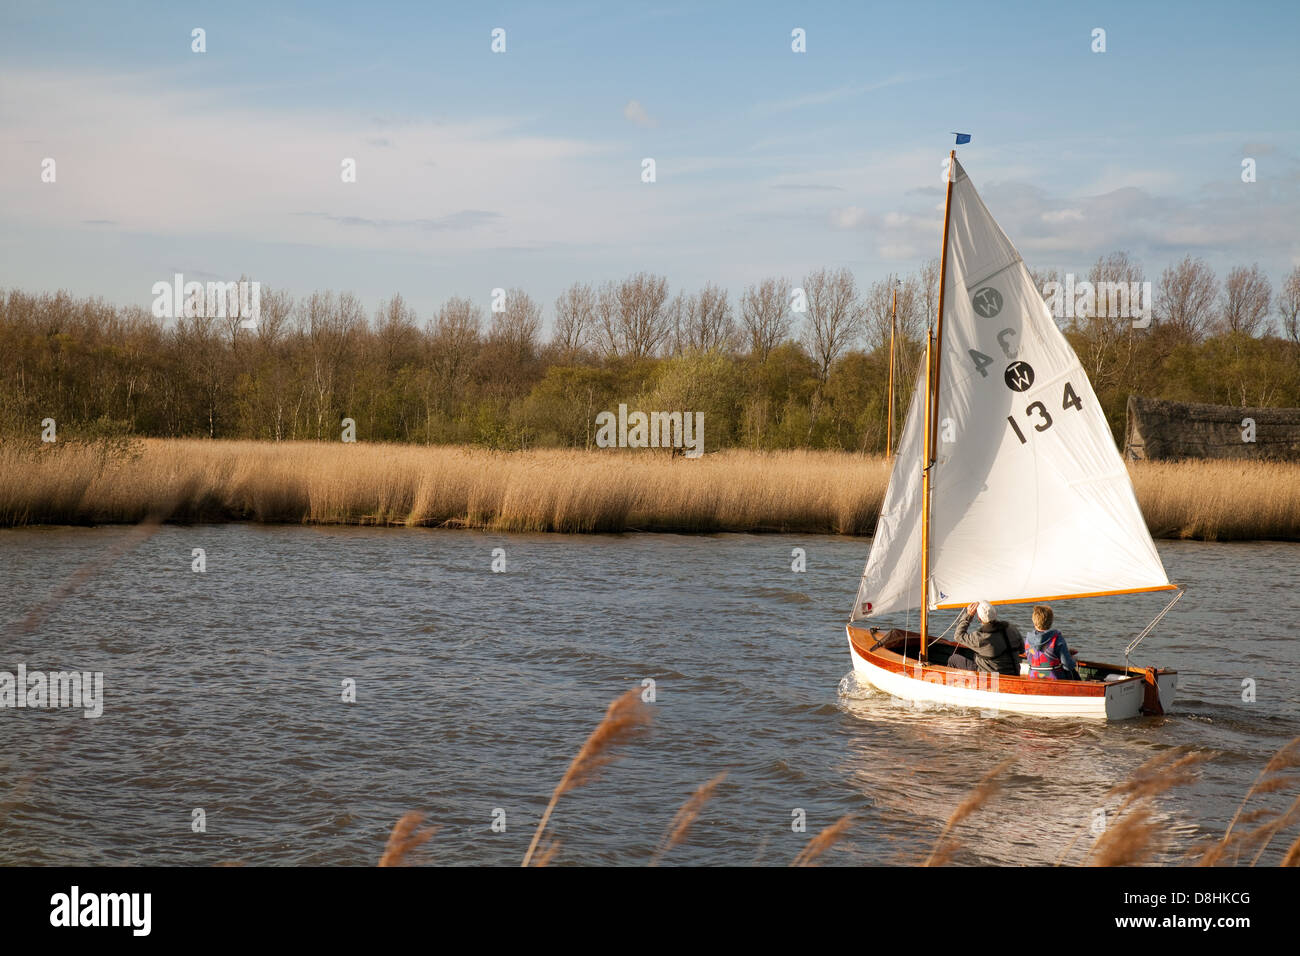 Sailing Norfolk Broads; A sailboat sailing on the Norfolk Broads at Horsey Mere, East Anglia England UK Stock Photo